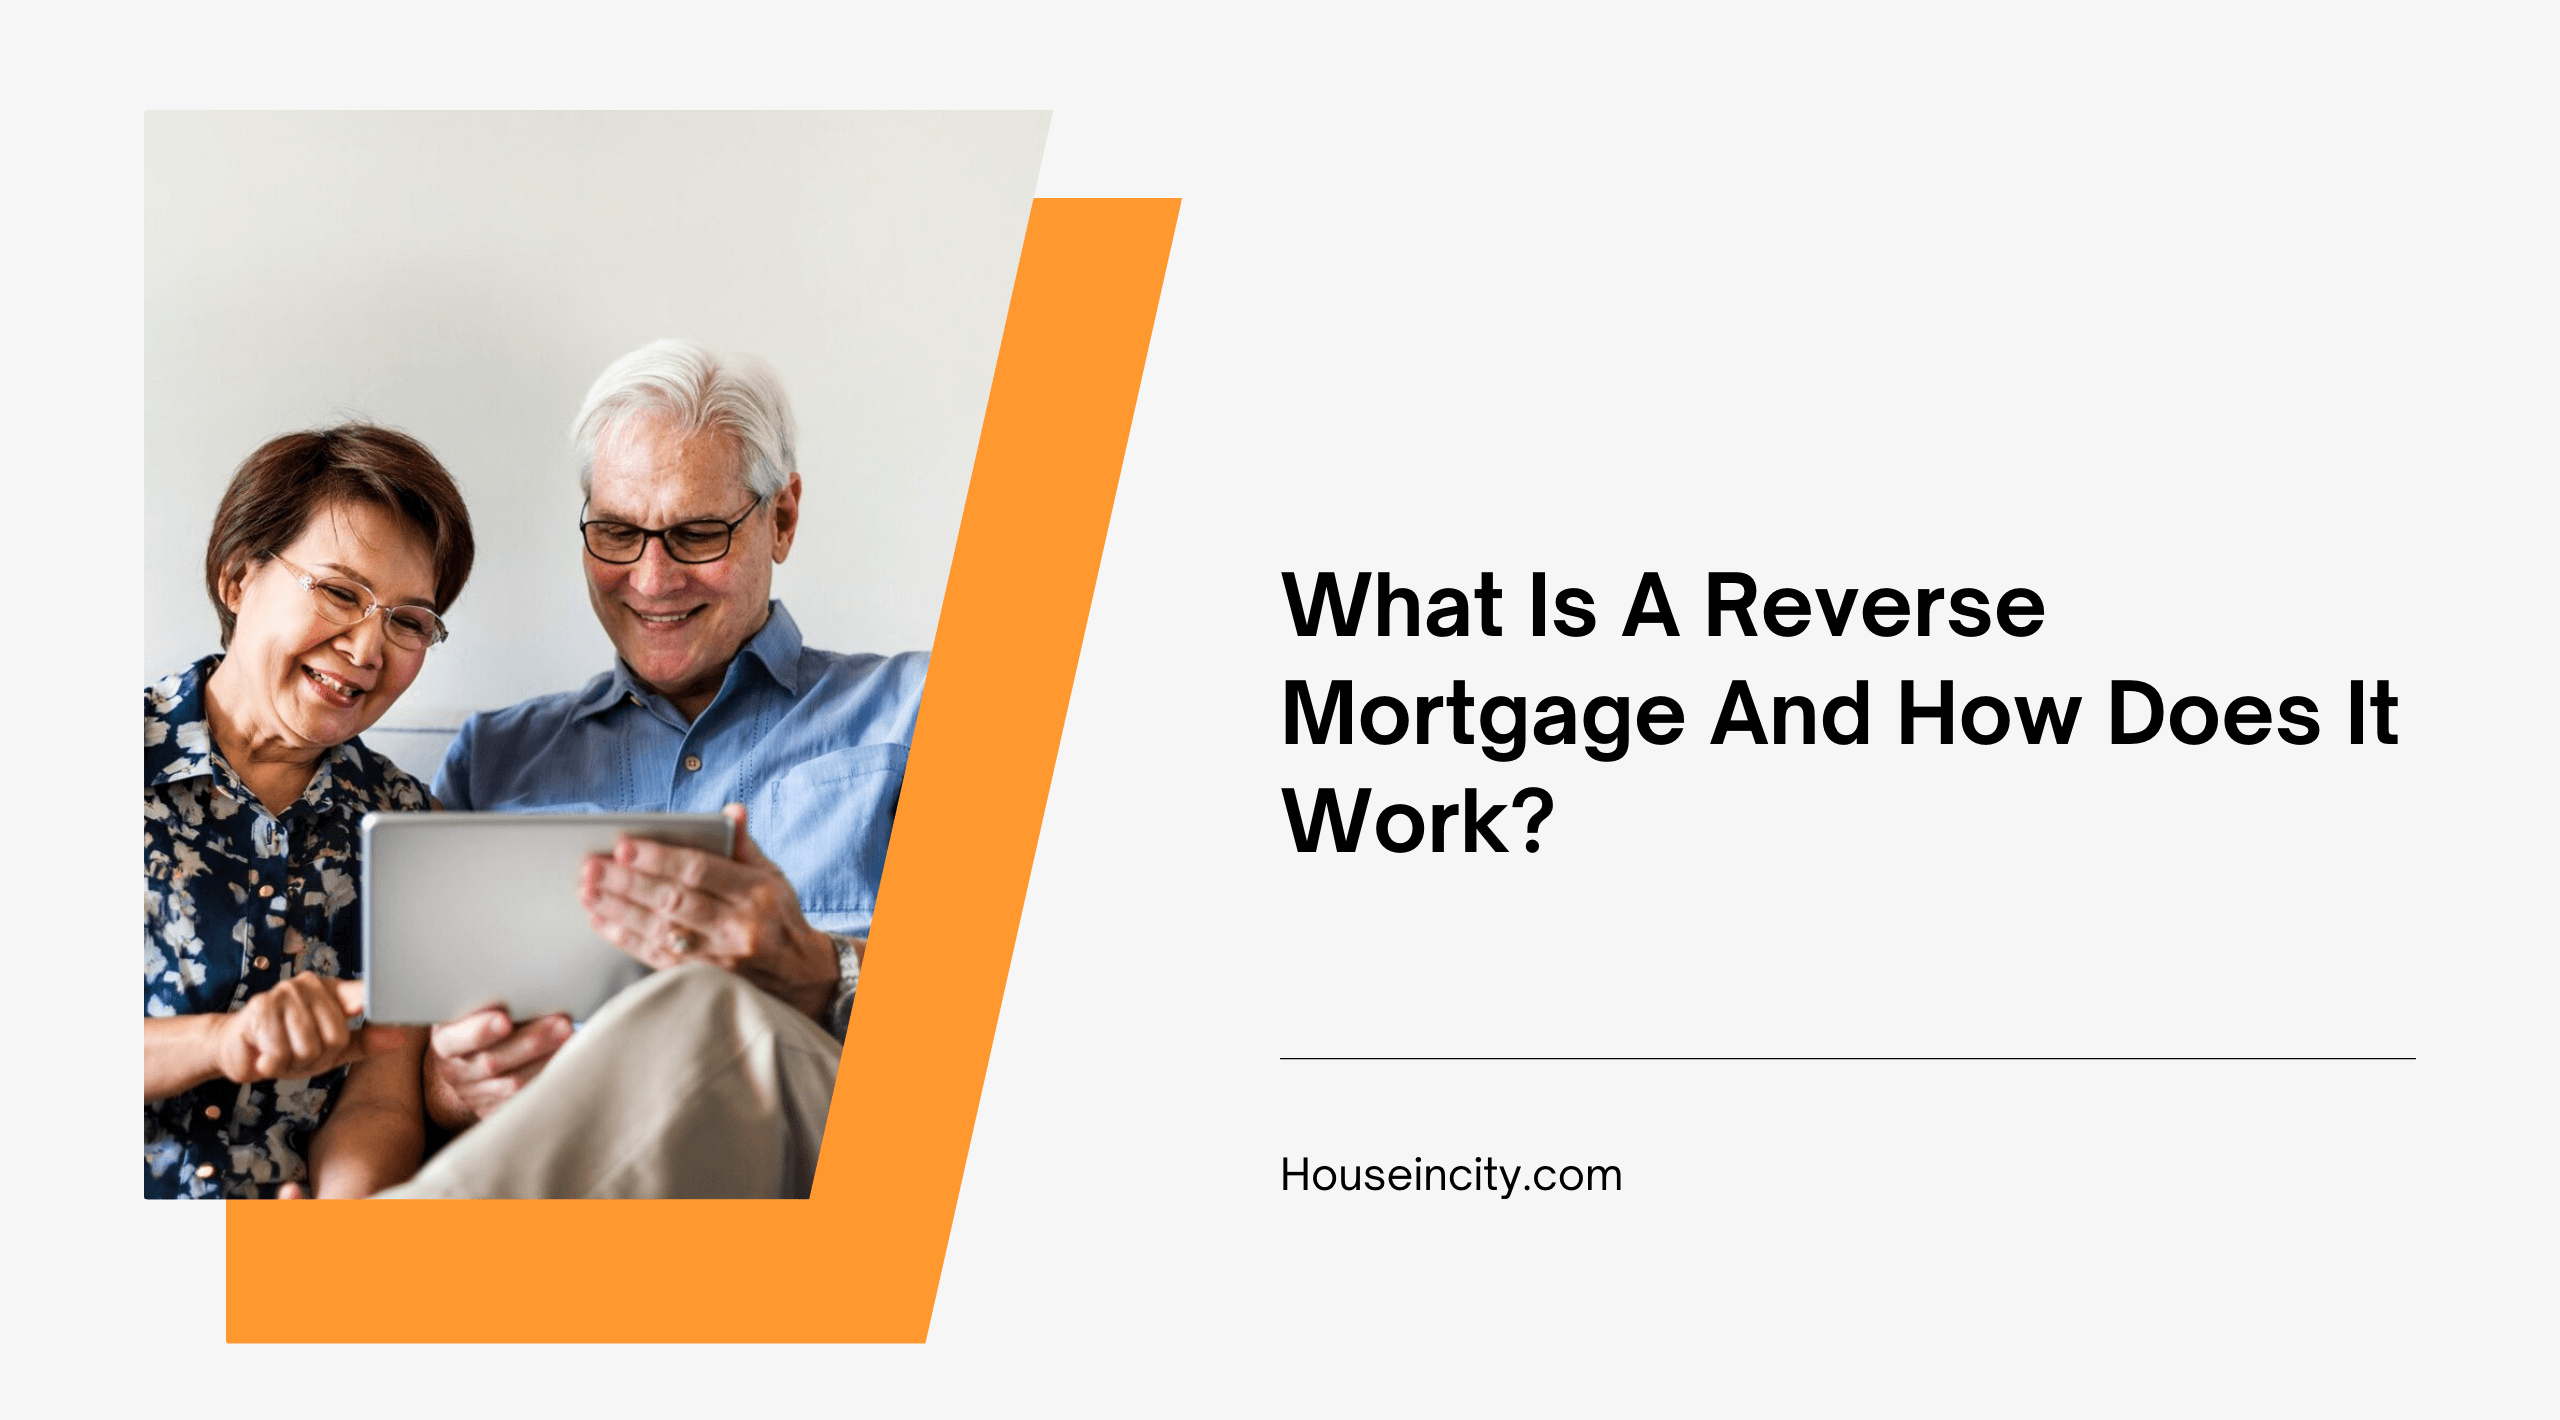 What Is A Reverse Mortgage And How Does It Work?